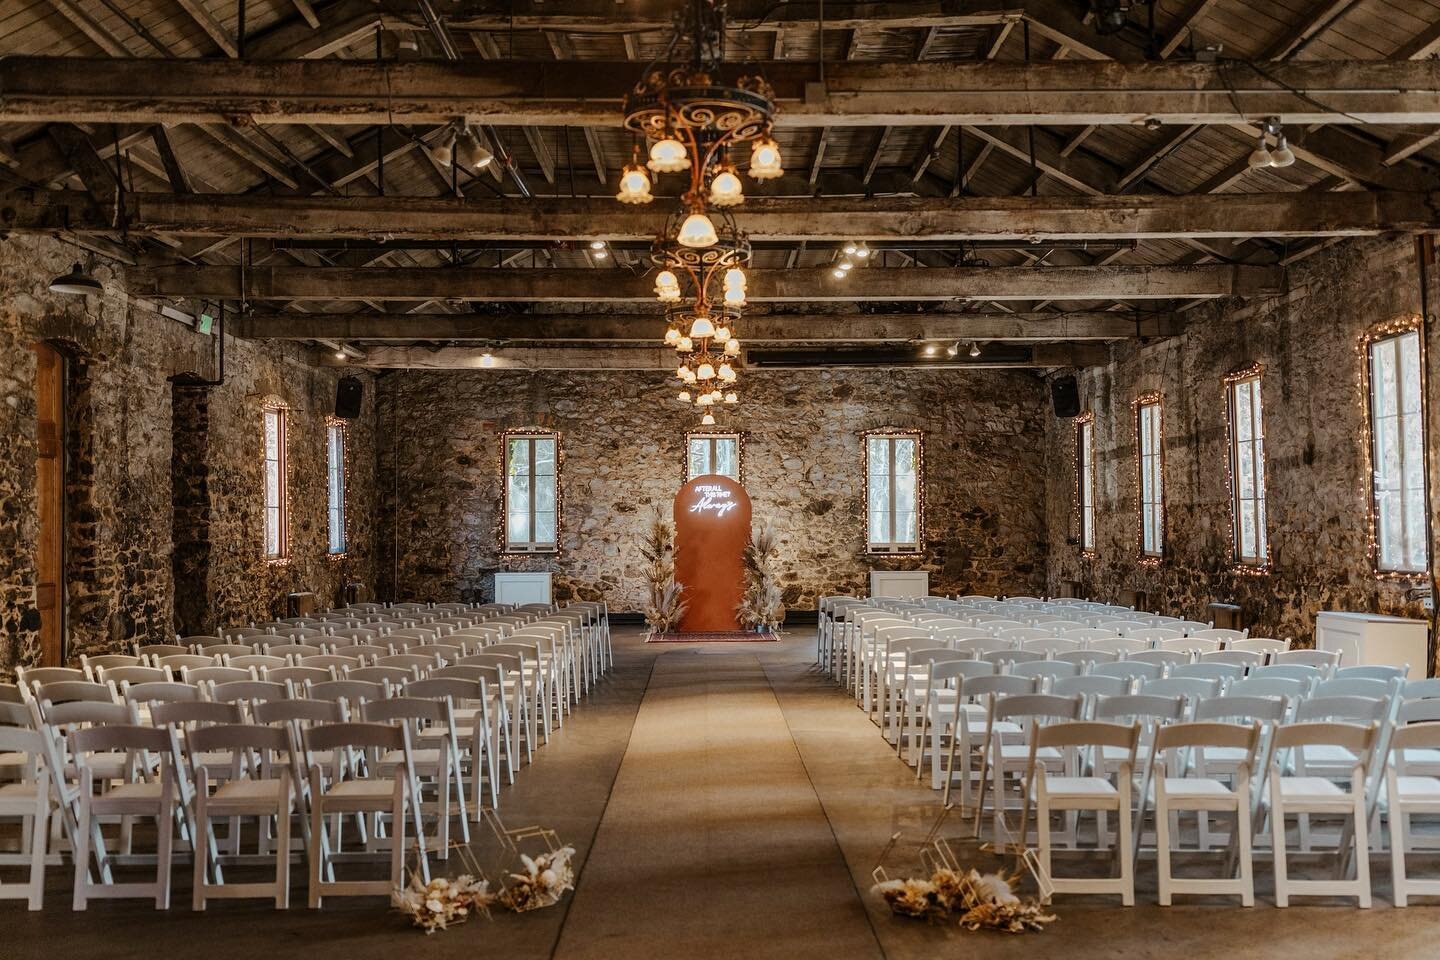 Same same but ✨different✨

Let&rsquo;s talk ROOM FLIPS! What should you know and keep in mind? Well I&rsquo;ve got it all for you ⬇️

✨ You may have fallen in love with a venue that really only has one space for both the ceremony and the reception. D